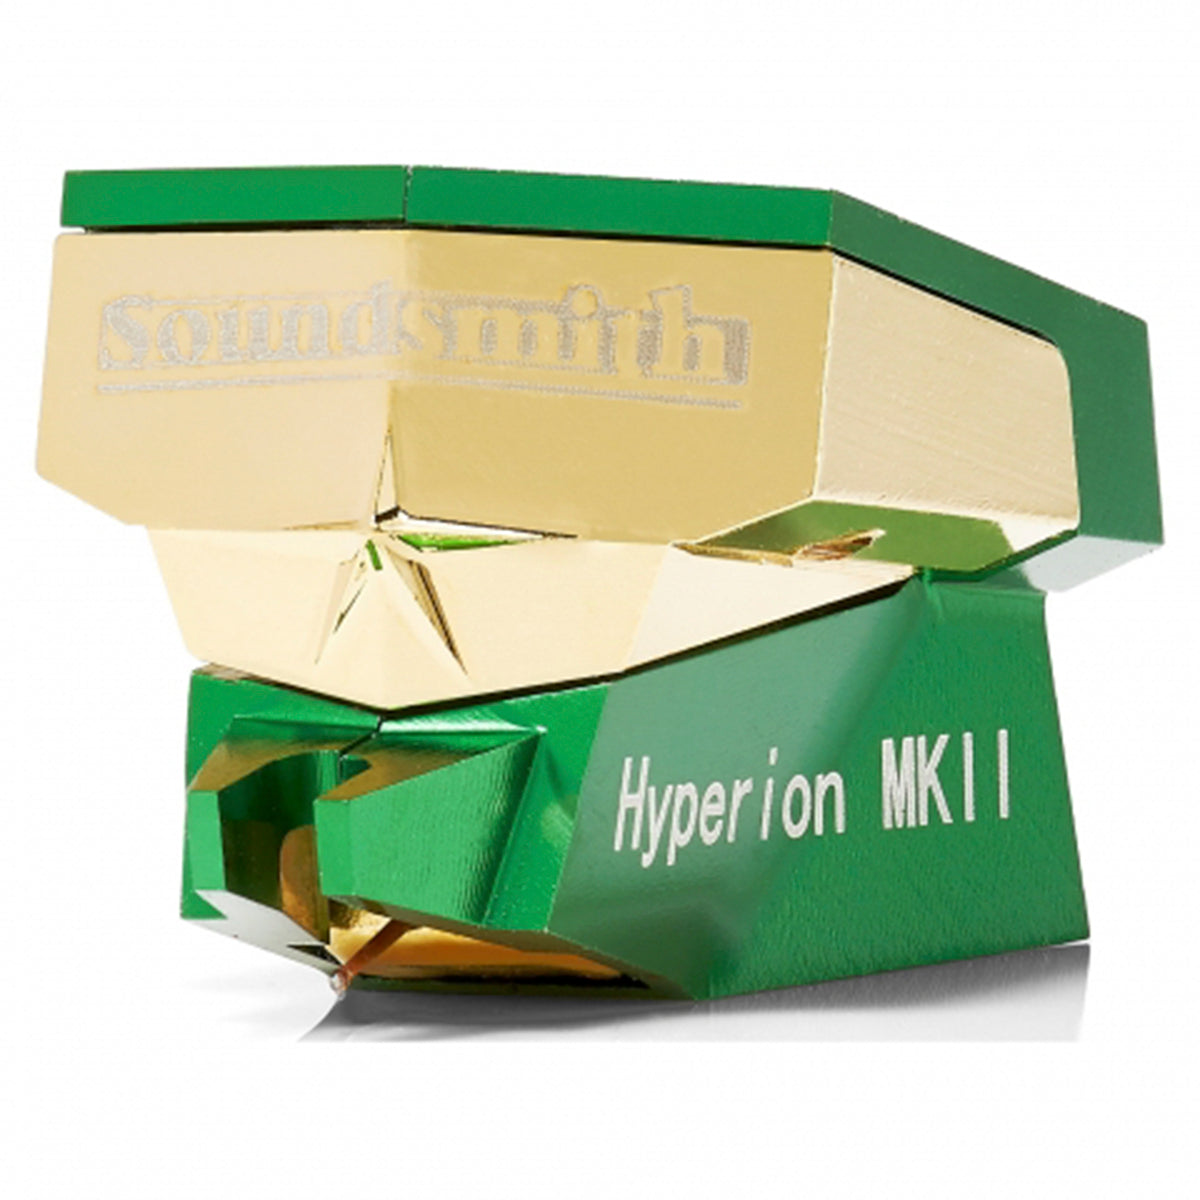 Soundsmith Hyperion MKII Moving Iron Cartridge